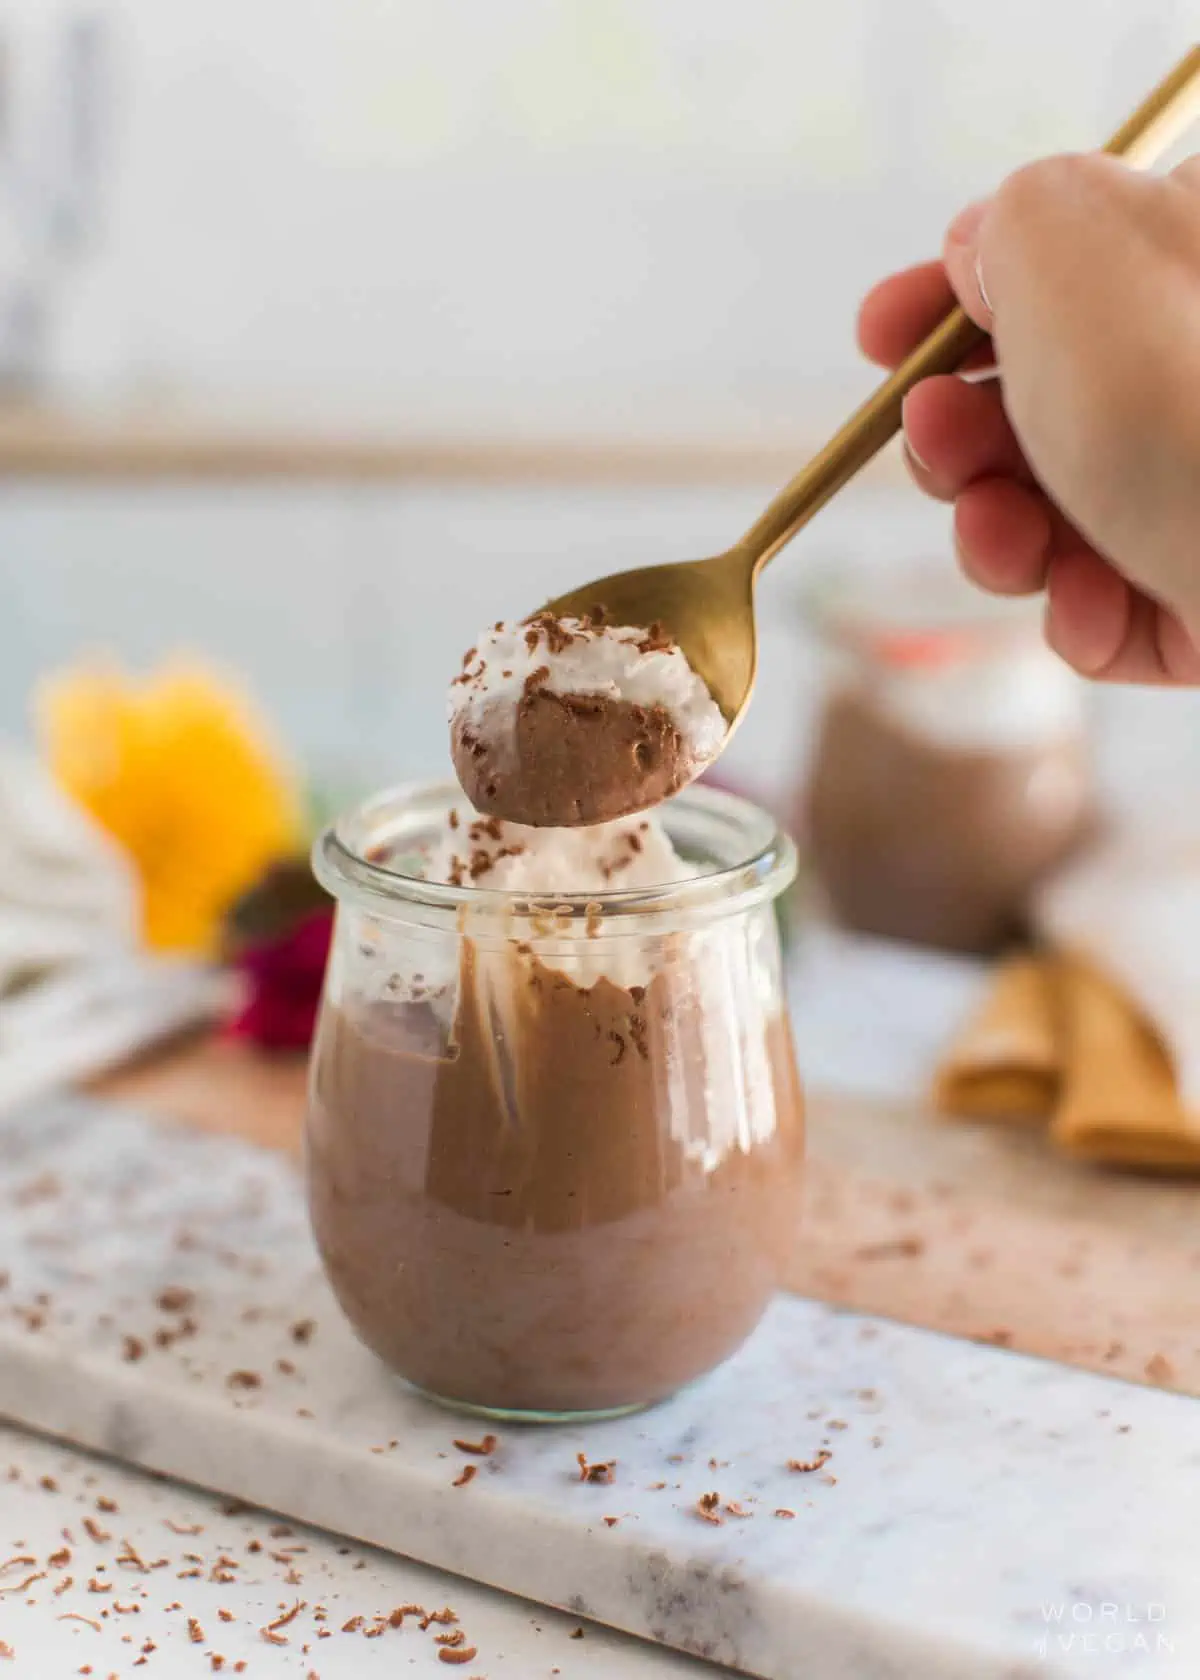 Hand scooping up a bite of vegan chocolate pudding with a spoon.